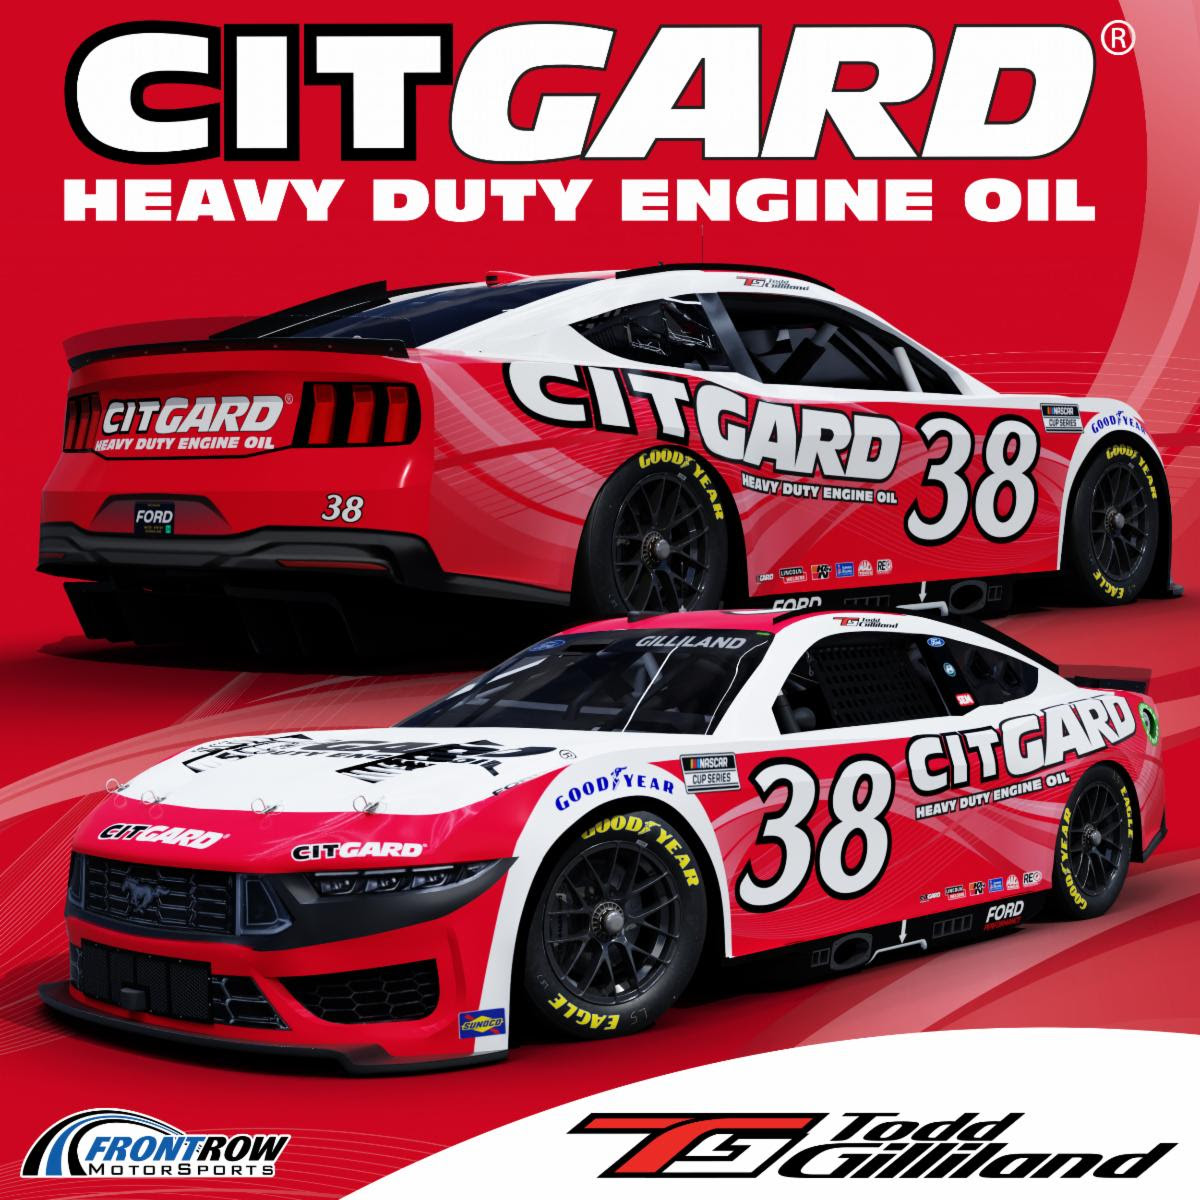 CITGARD®, Front Row Motorsports Reunites to Partner with Gilliland